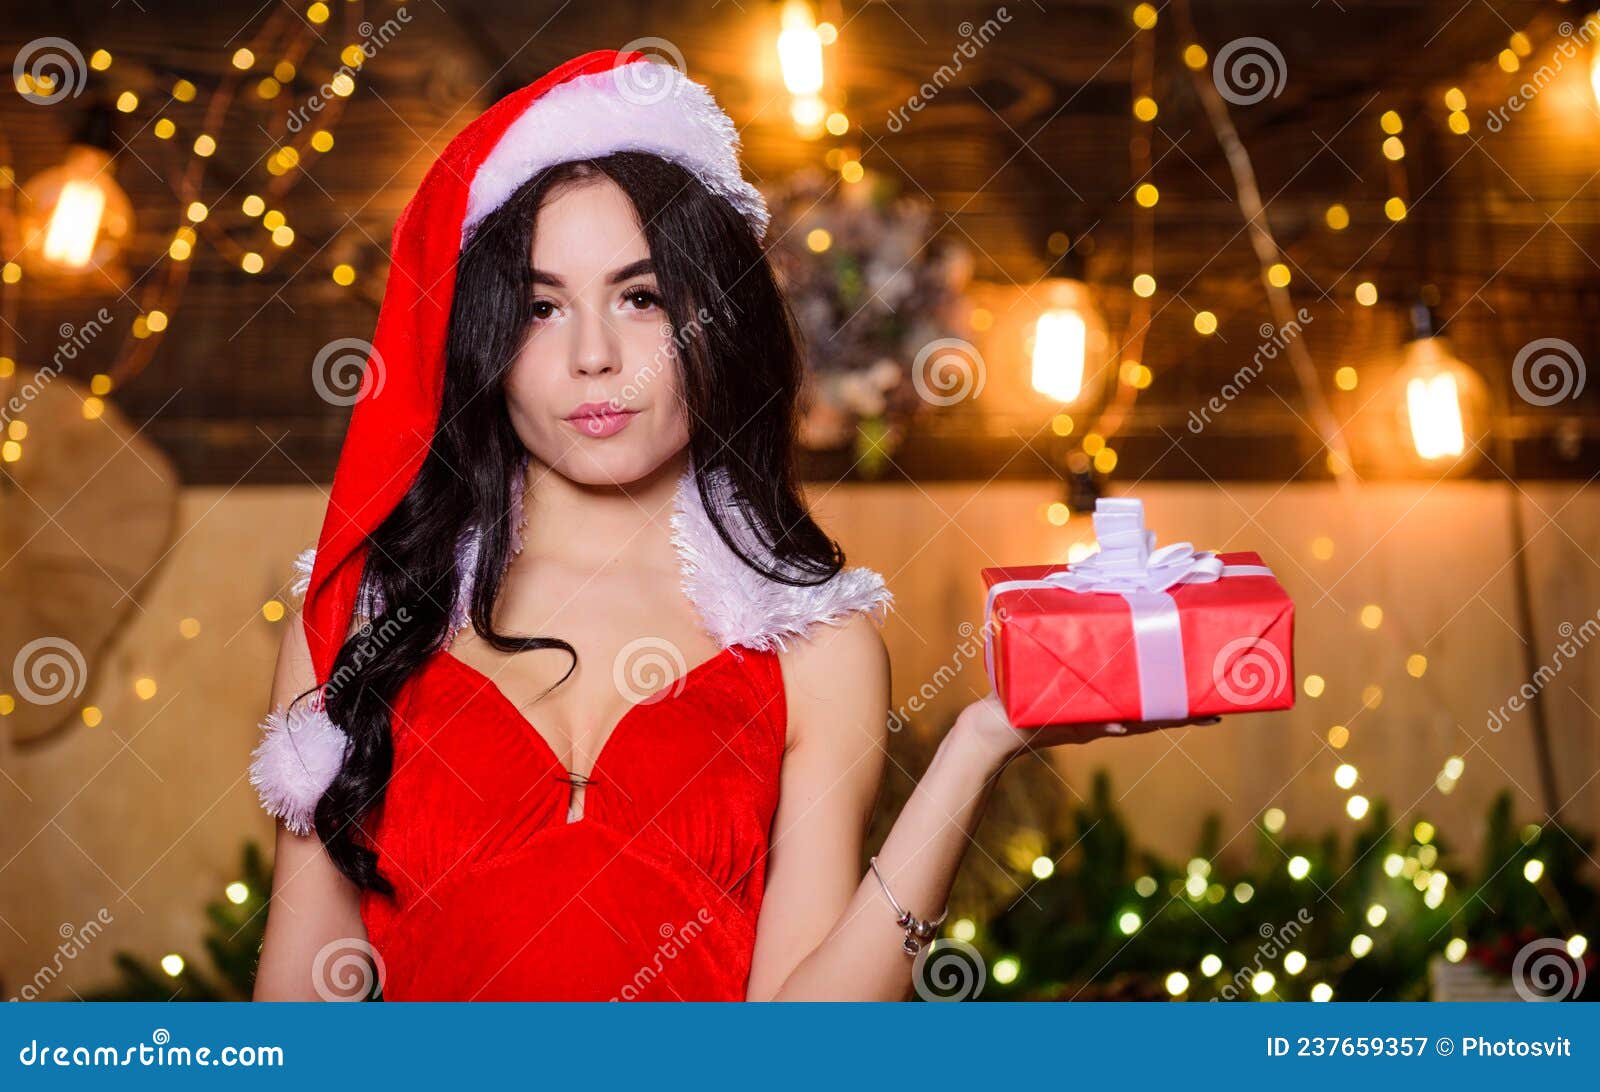 Sex Shop. Attractive Girl in Erotic Lingerie Hold Gift